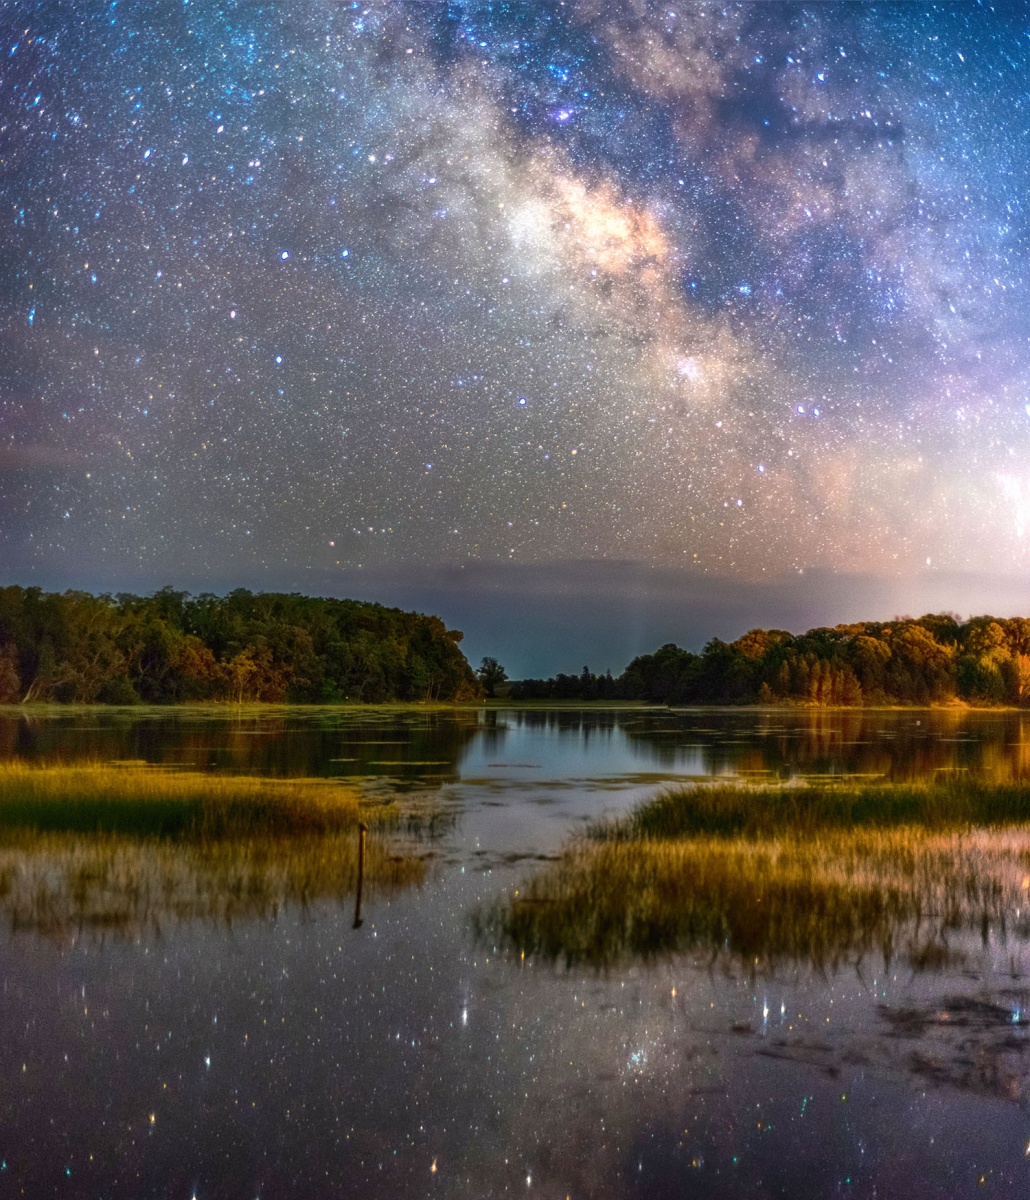 Green and orange trees stand along the water, reflecting the bright and starry light blue and purple sky above.